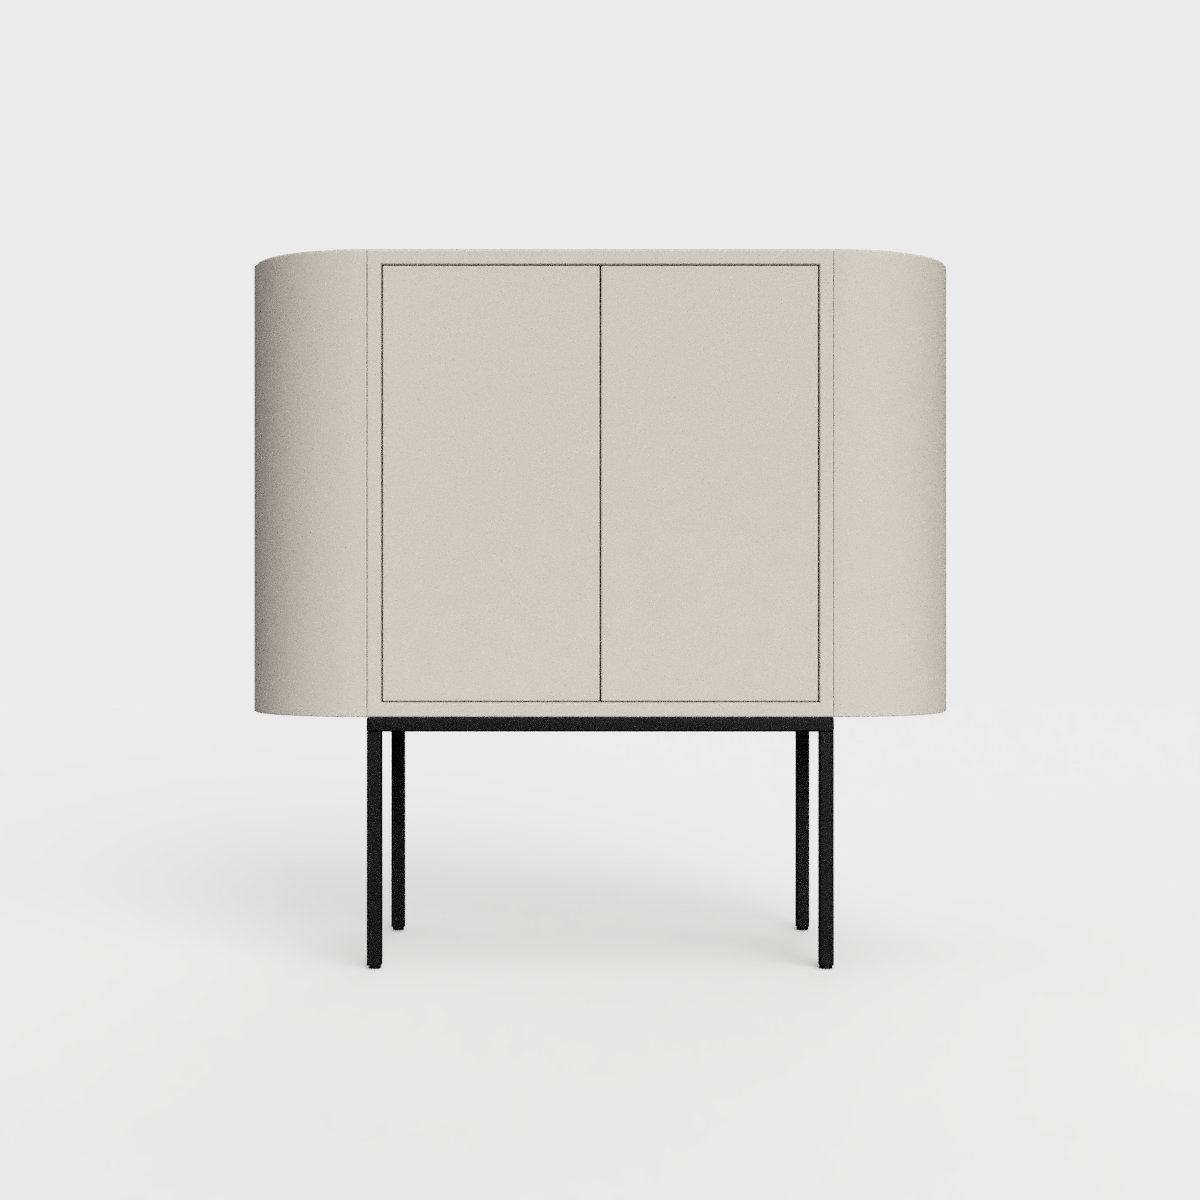 Siena 01 Sideboard in light beige color, powder-coated steel, elegant and modern piece of furniture for your living room